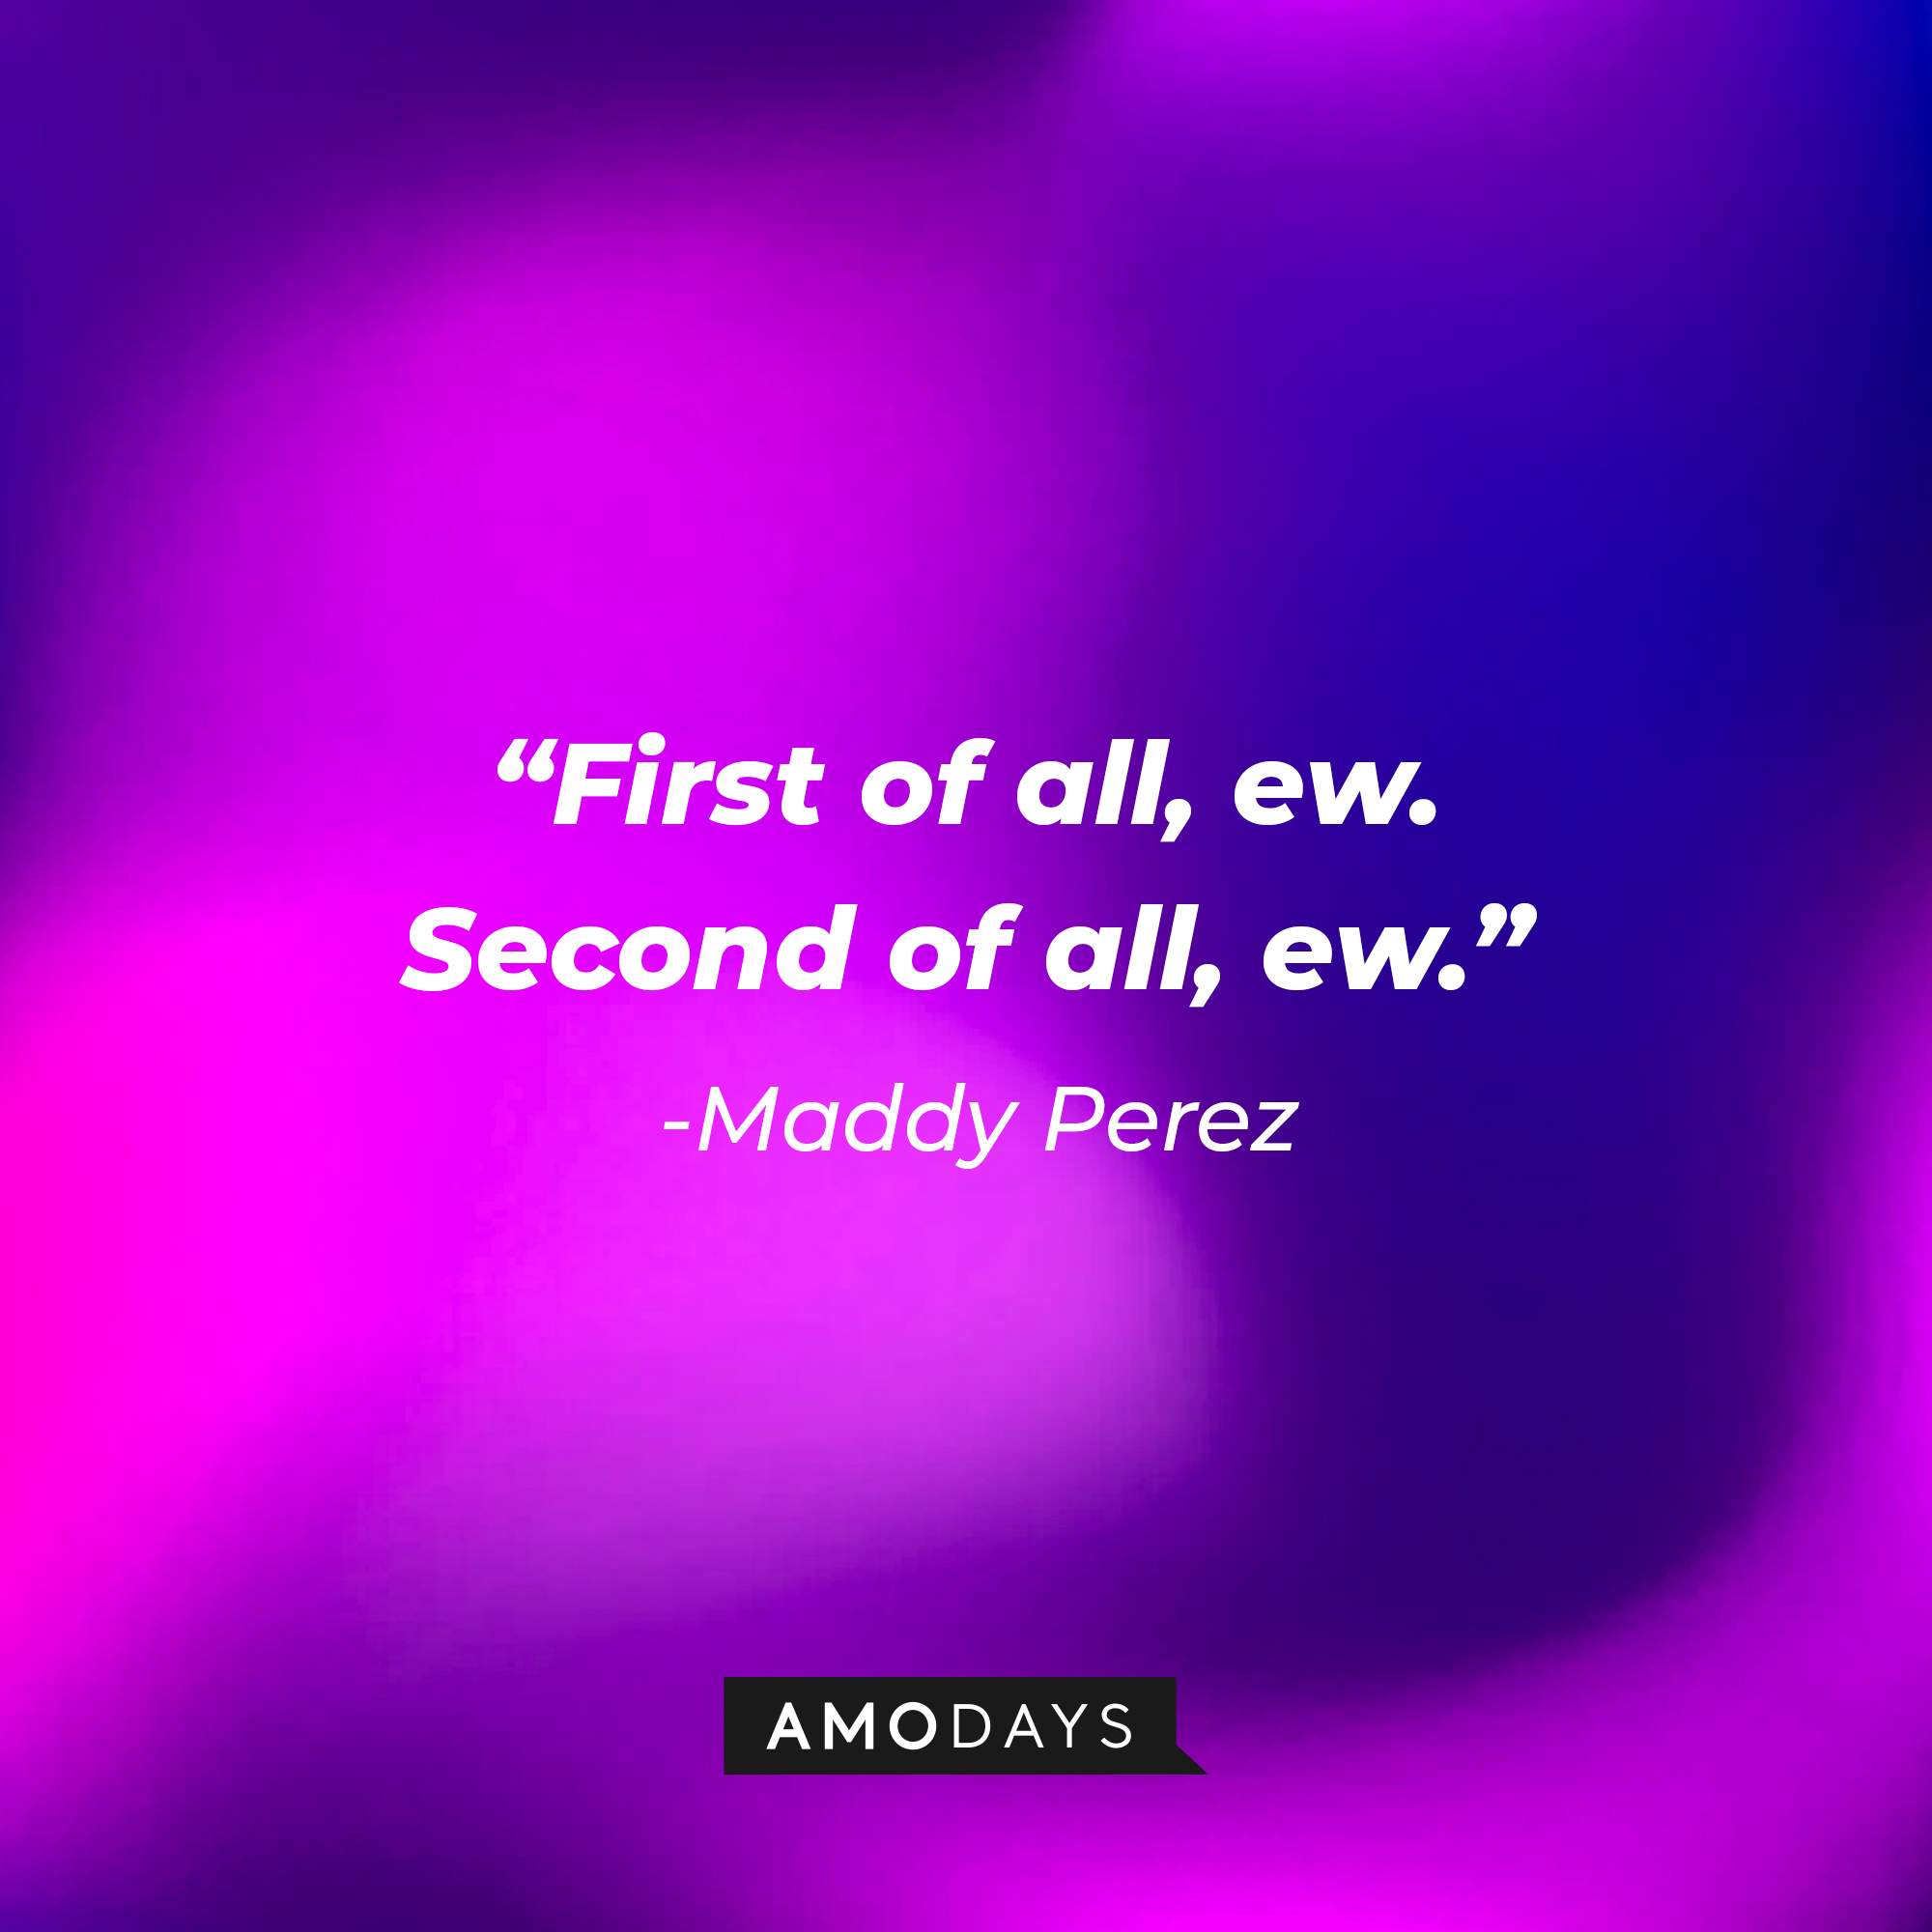 Maddy Perez’ quote: "First of all, ew. Second of all, ew."  | Source: AmoDays